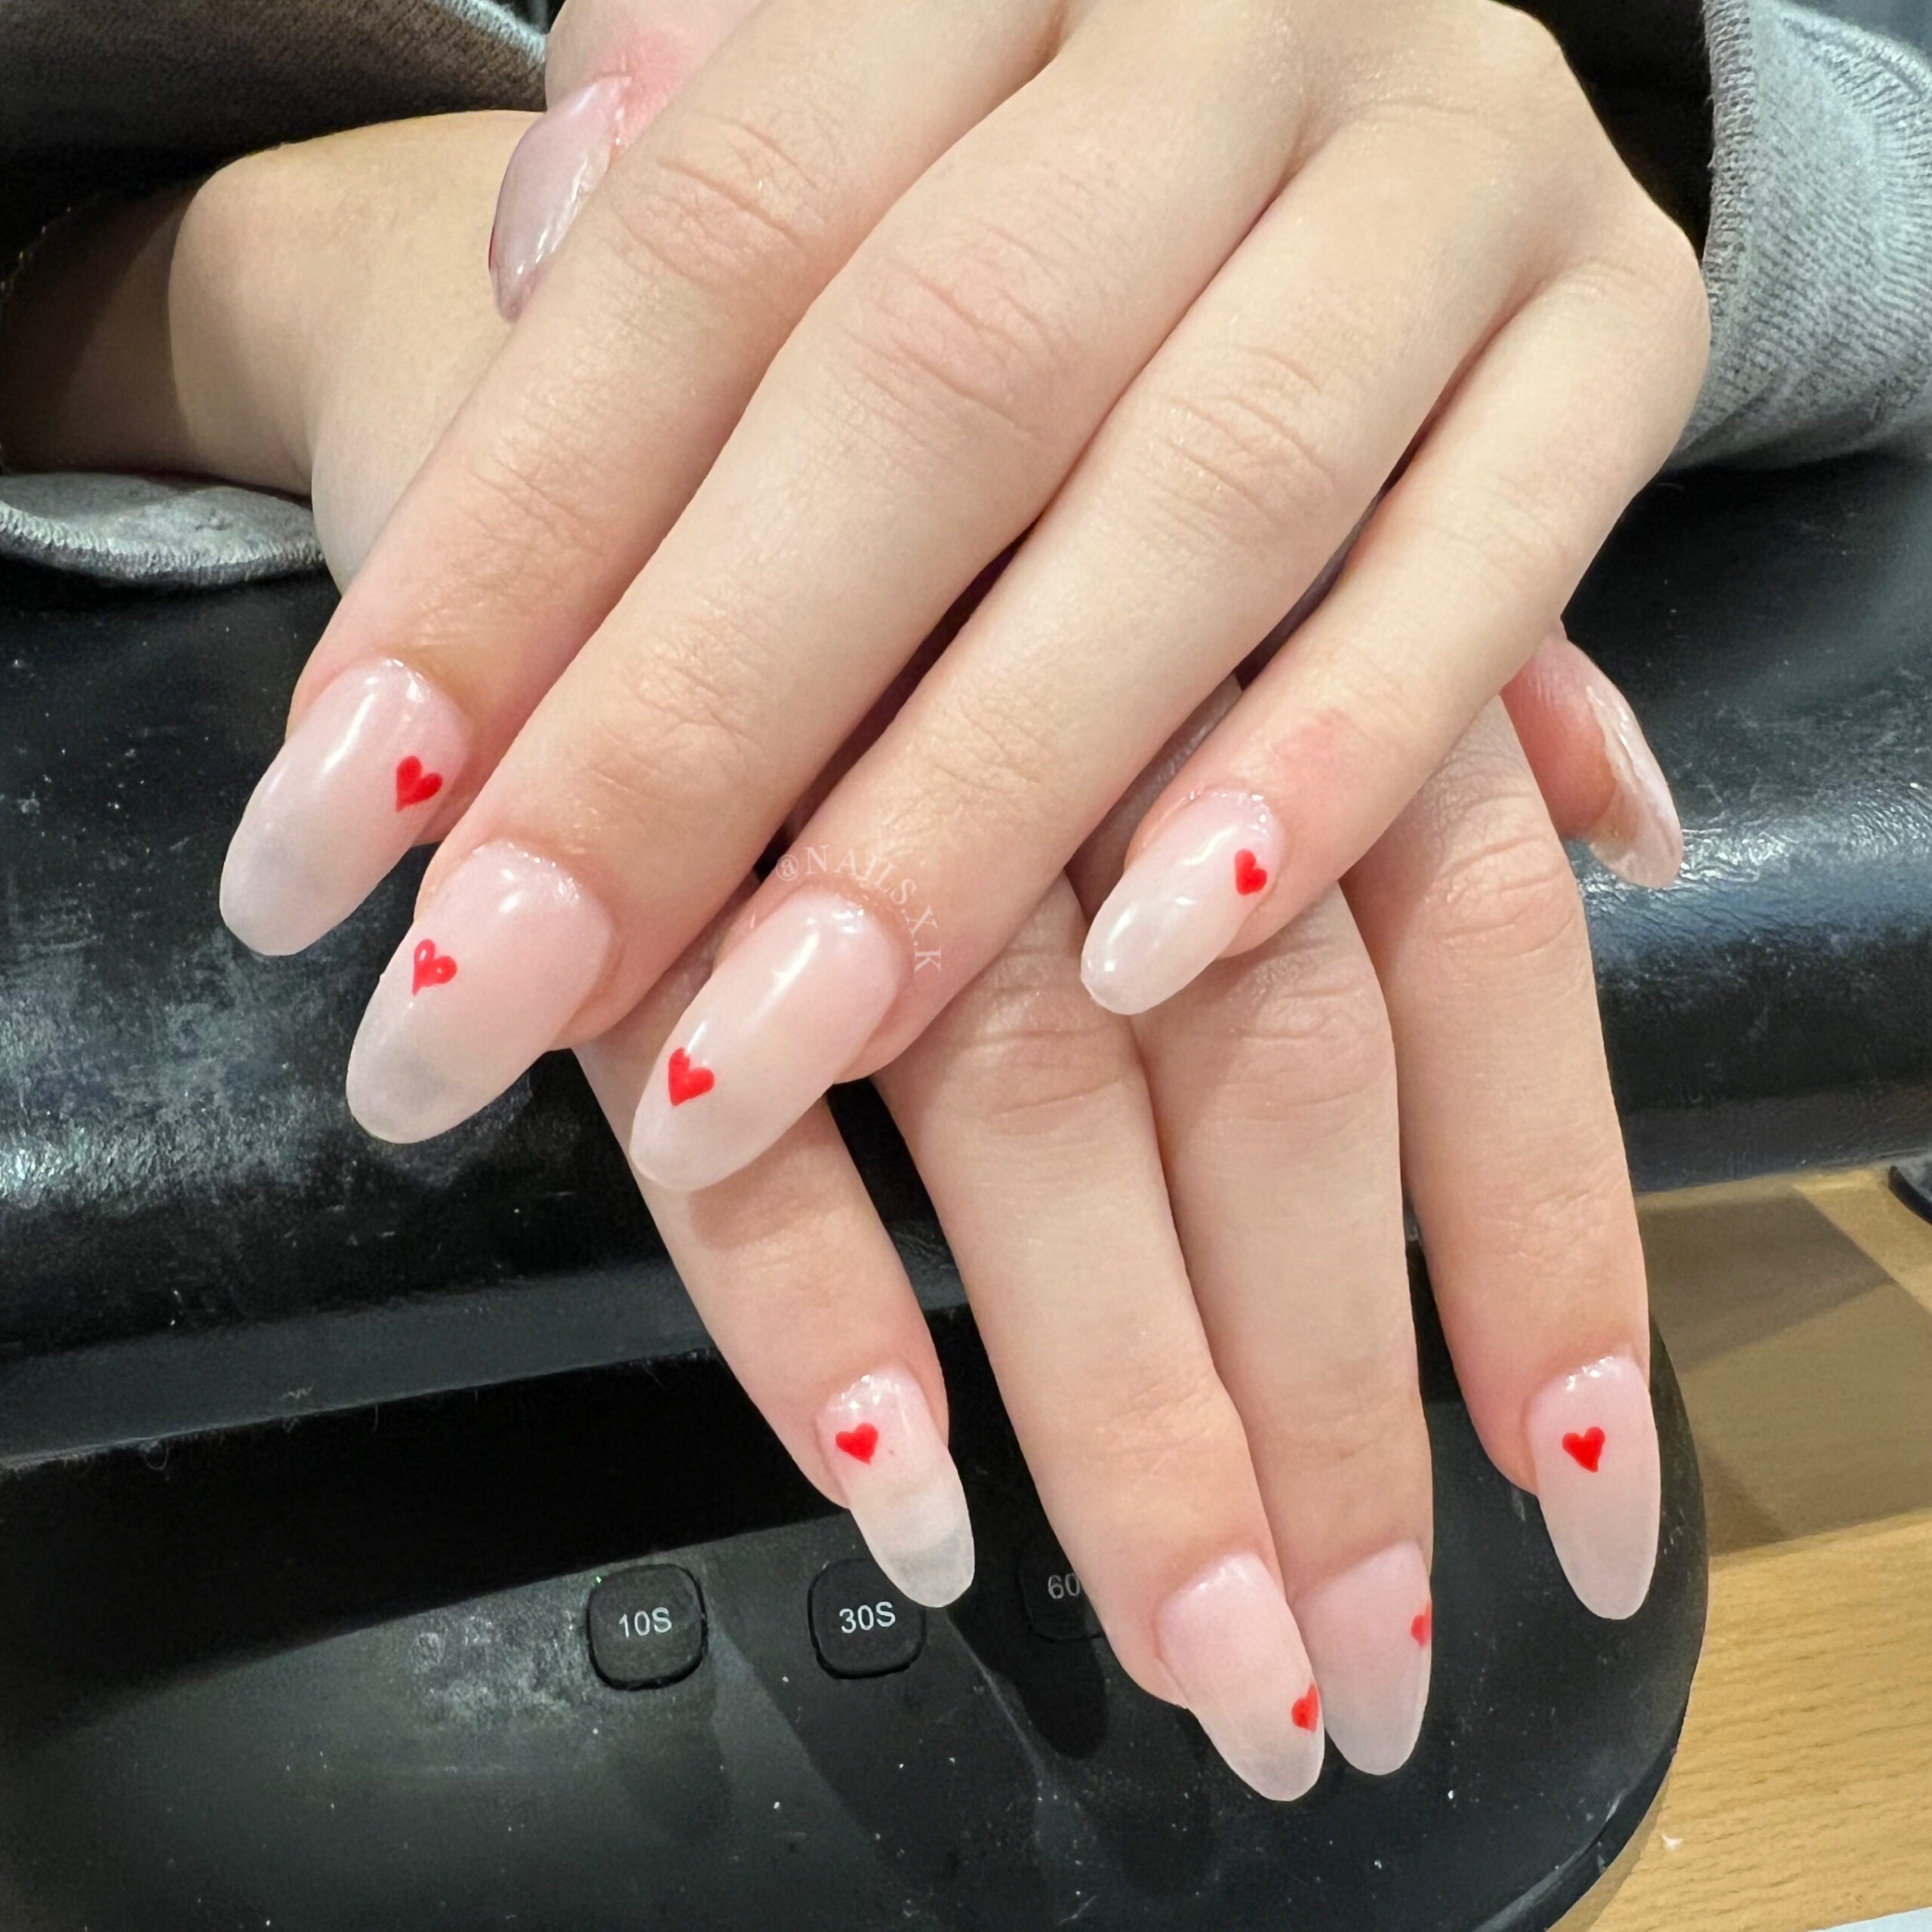 Acrylic nails with a nude pink color and red hand drawn hearts. Nails by K